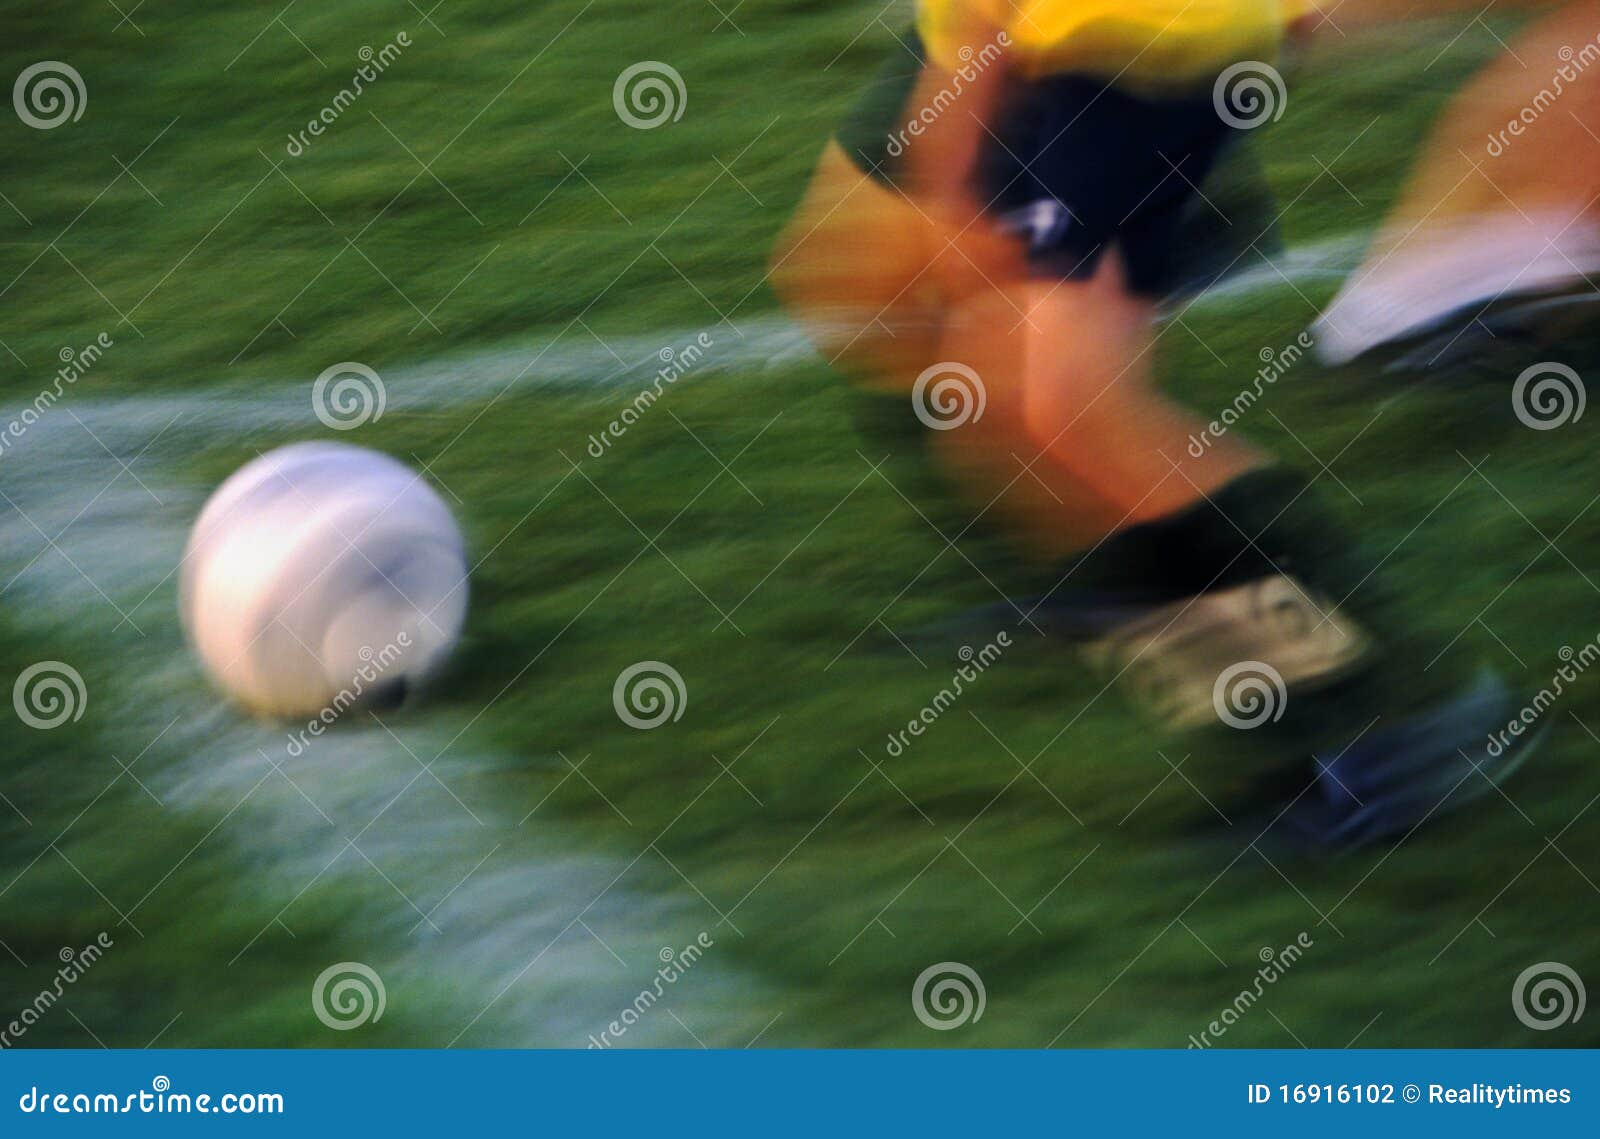 soccer action in time lapse motion blur